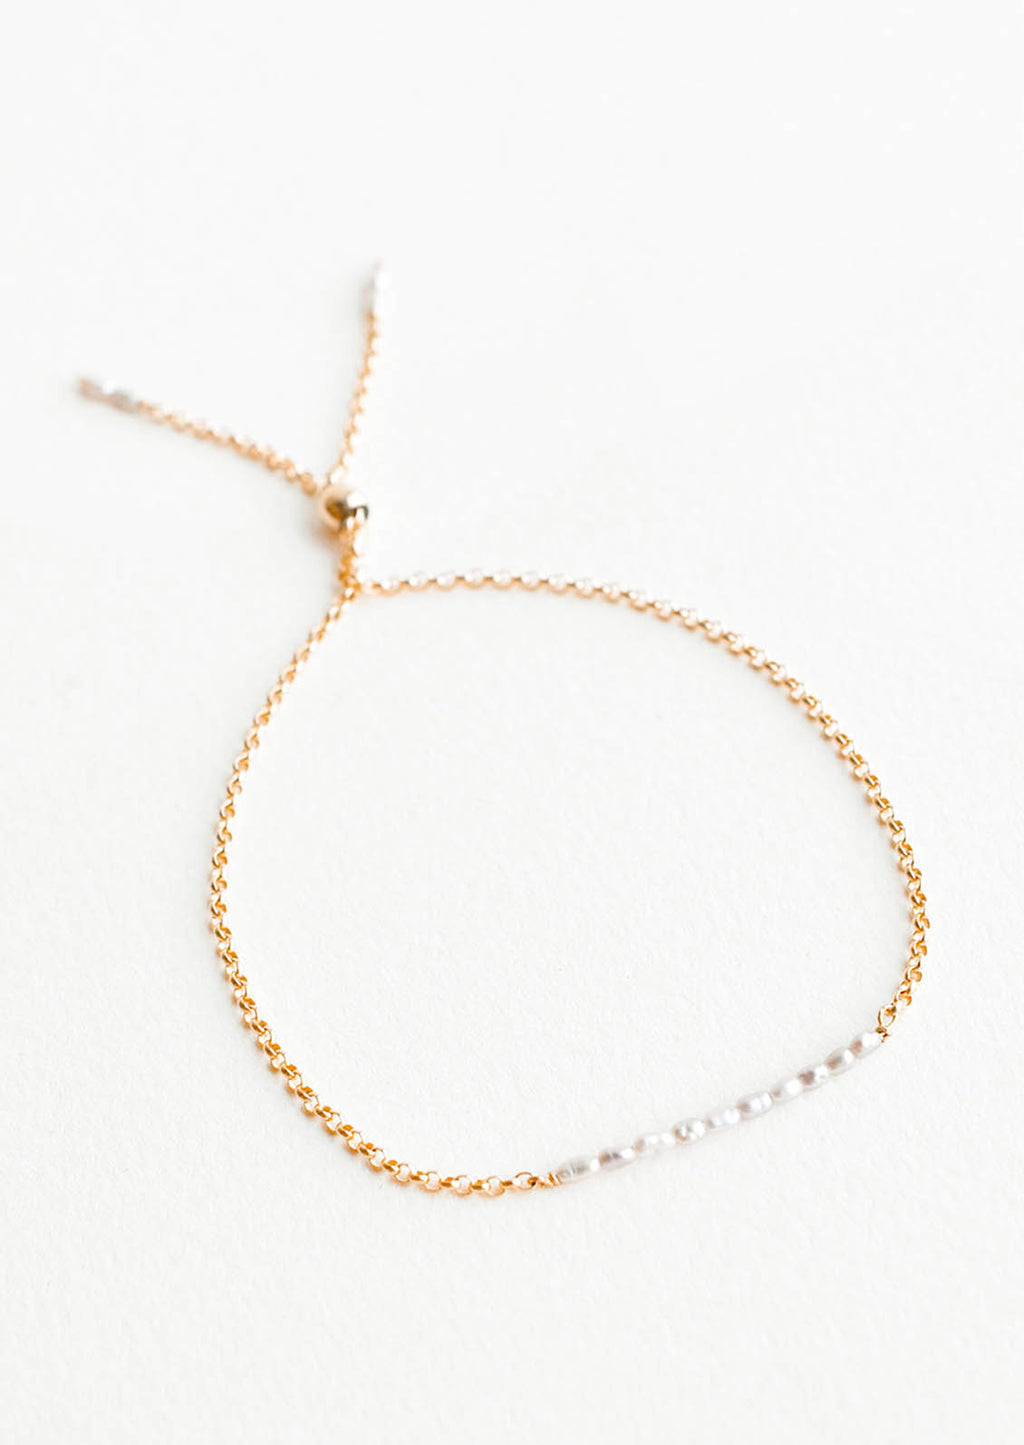 Freshwater Pearl: A delicate gold chain bracelet featuring a row of miniature freshwater pearls.